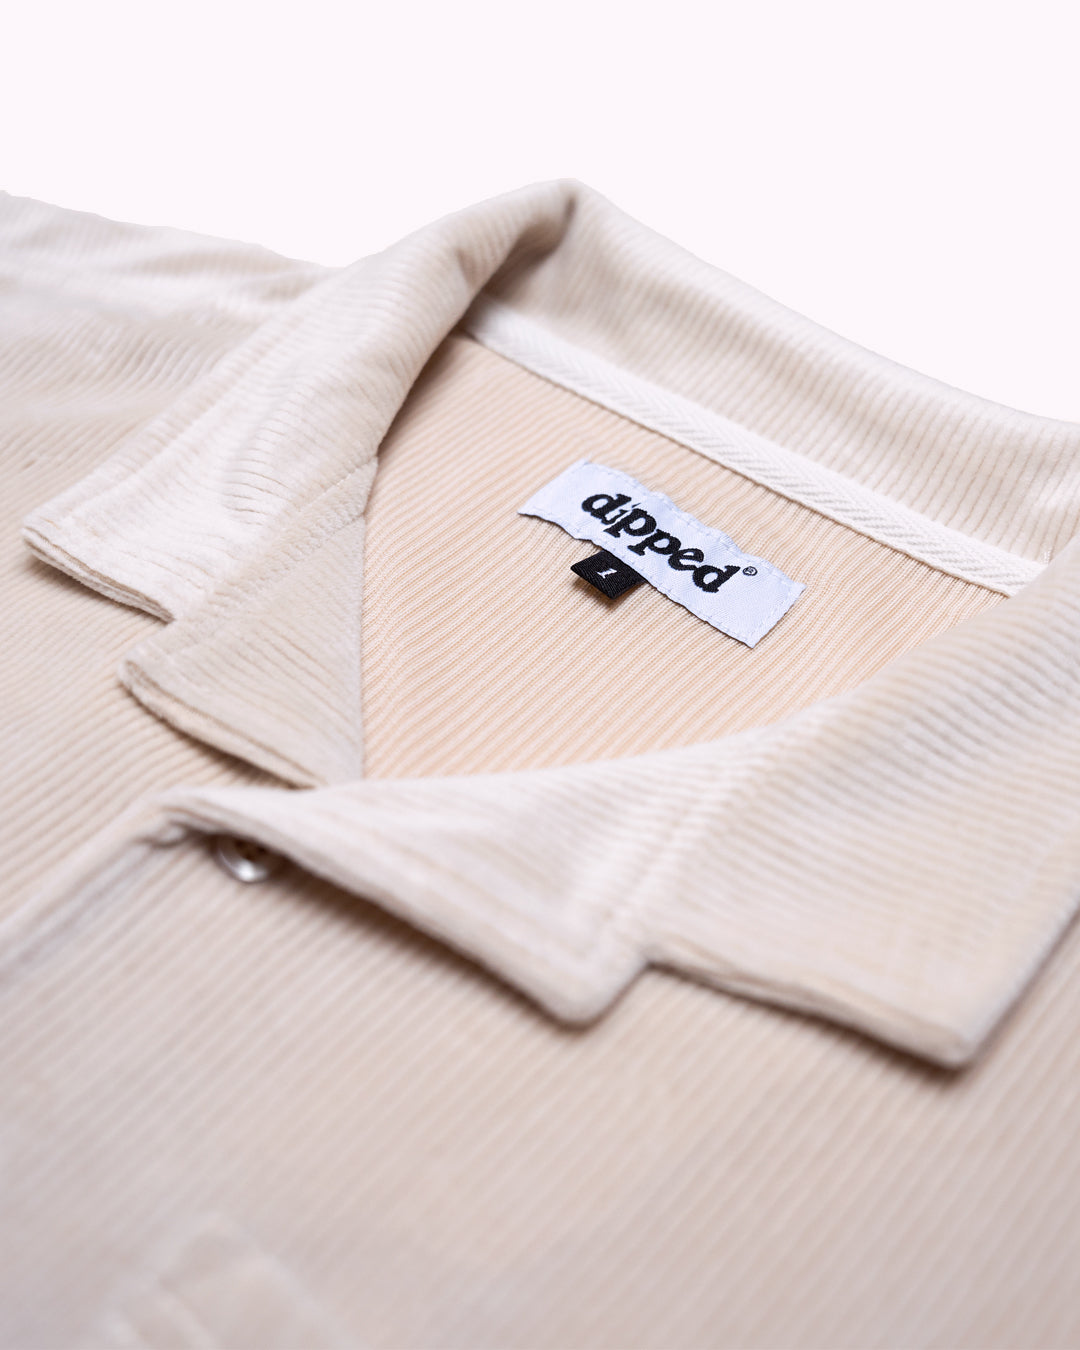 DIPPED® Motion Velour Button Up - Cream